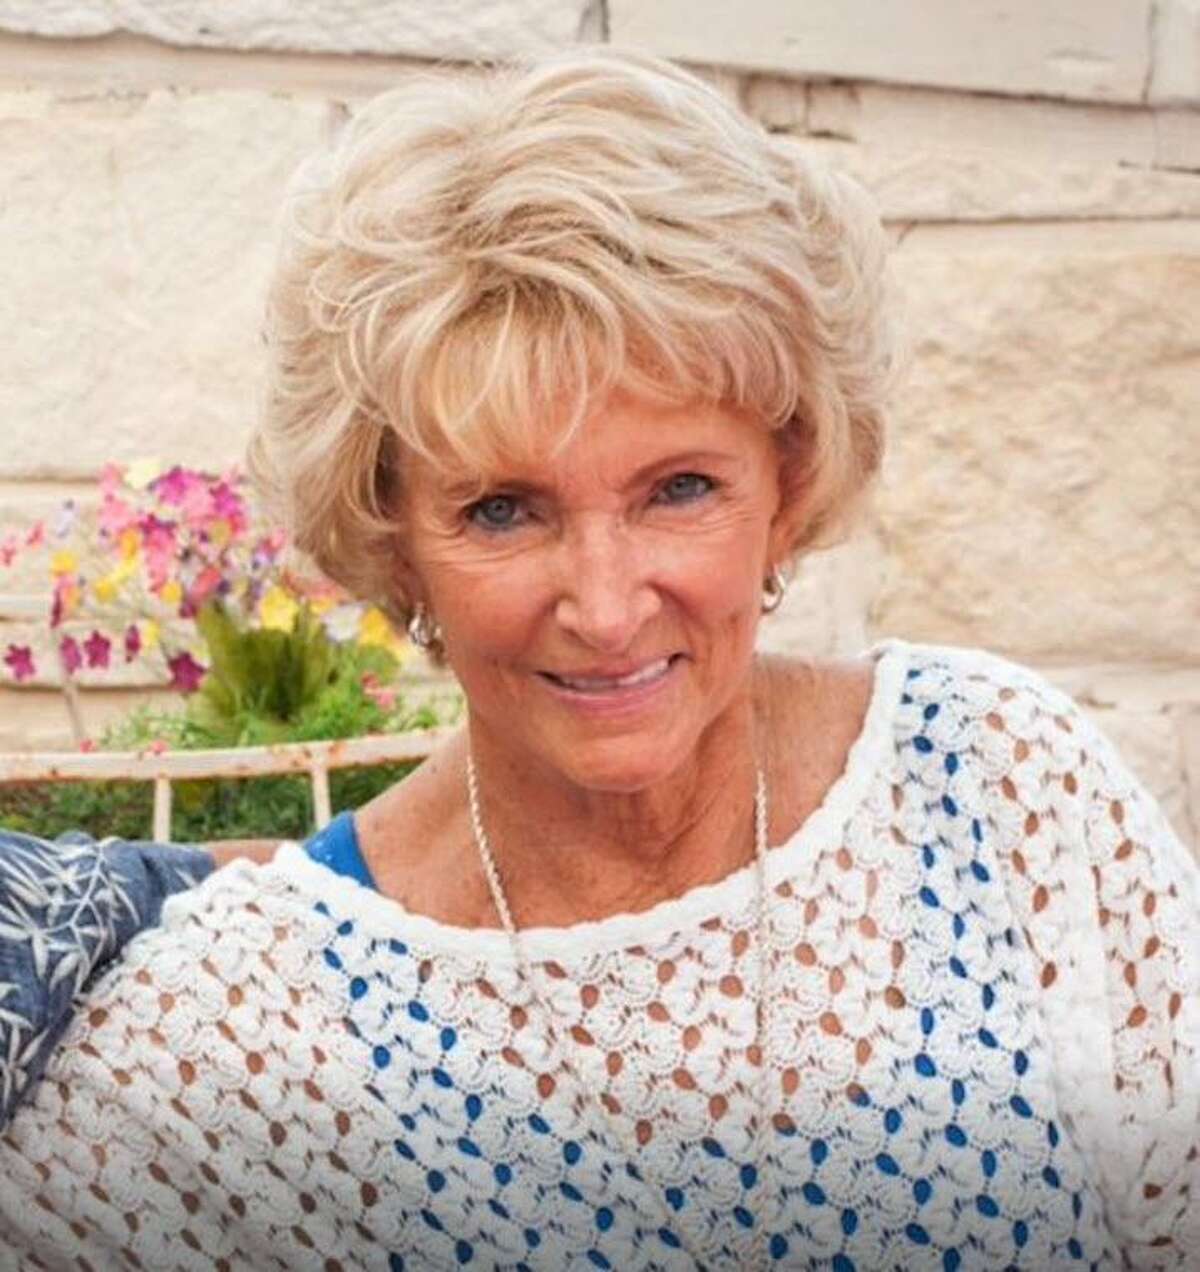 Betty Thomas, an 83-year-old Irving, Texas resident, was murdered in her home in December 2019 by a cable technician employed by Stamford-based Charter Communications. A Texas judge has ordered Charter to pay damages of about $1.15 billion in connection with Thomas’ death.